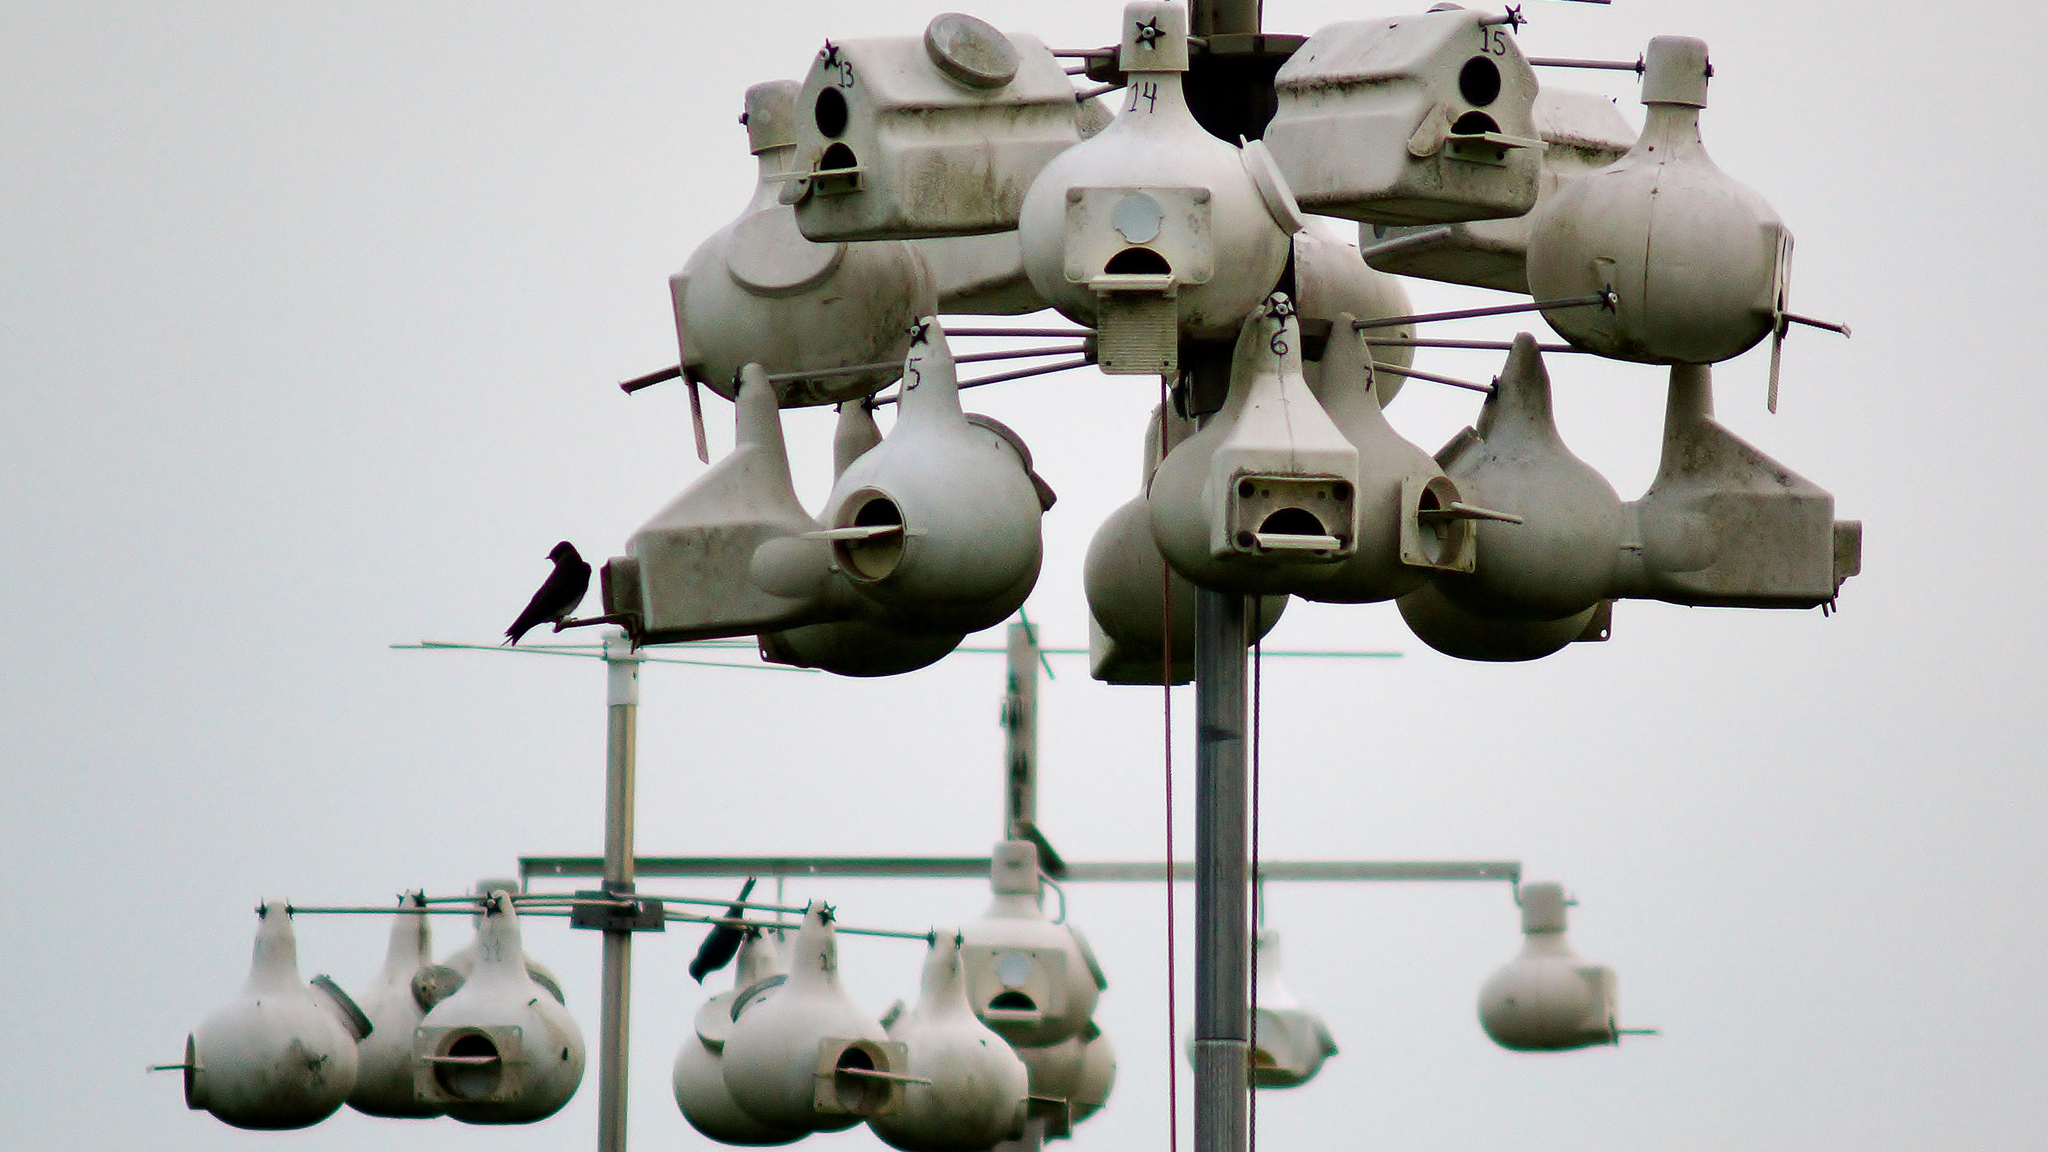 Purple Martin houses. Photo © Stephen Little / Flickr through a Creative Commons license